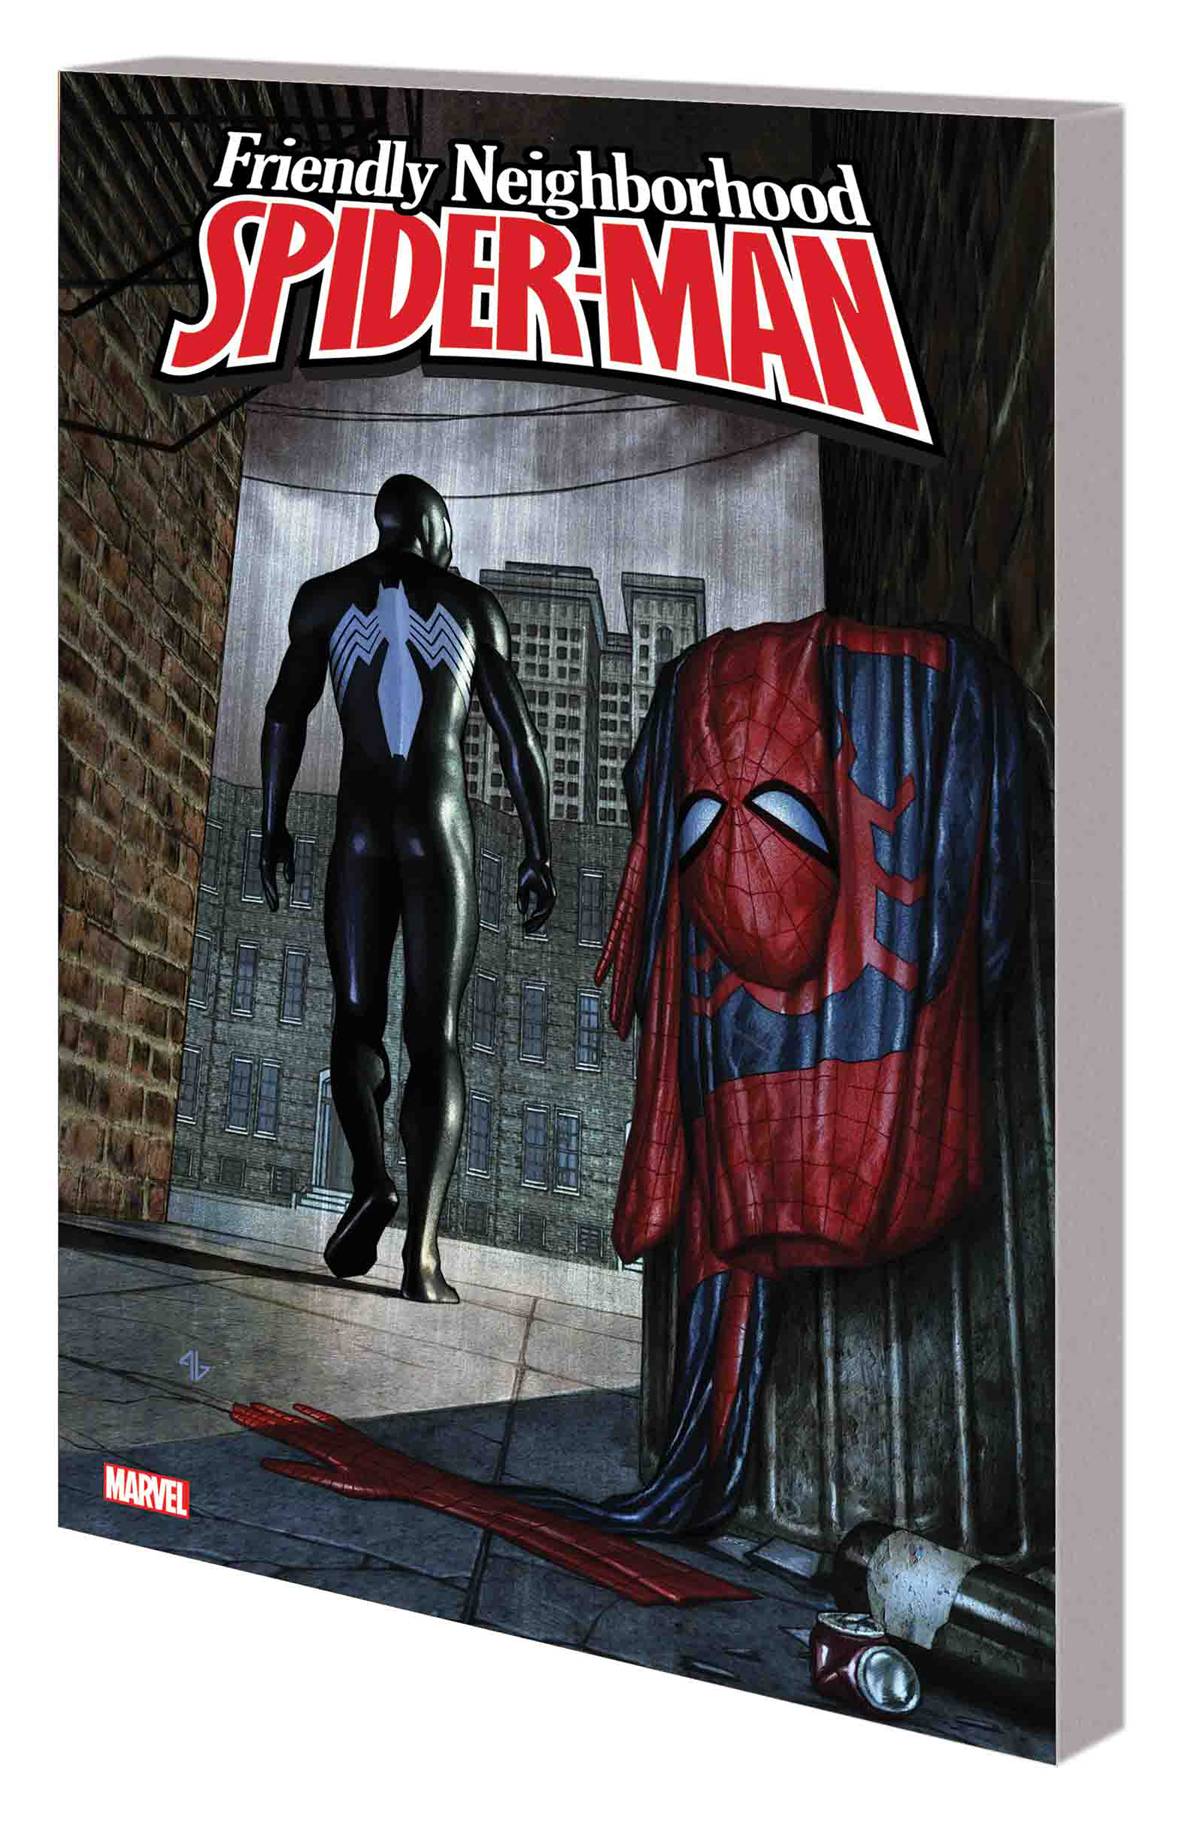 Spider-Man Friendly Neighborhood Sm by David Complete Collected Graphic Novel